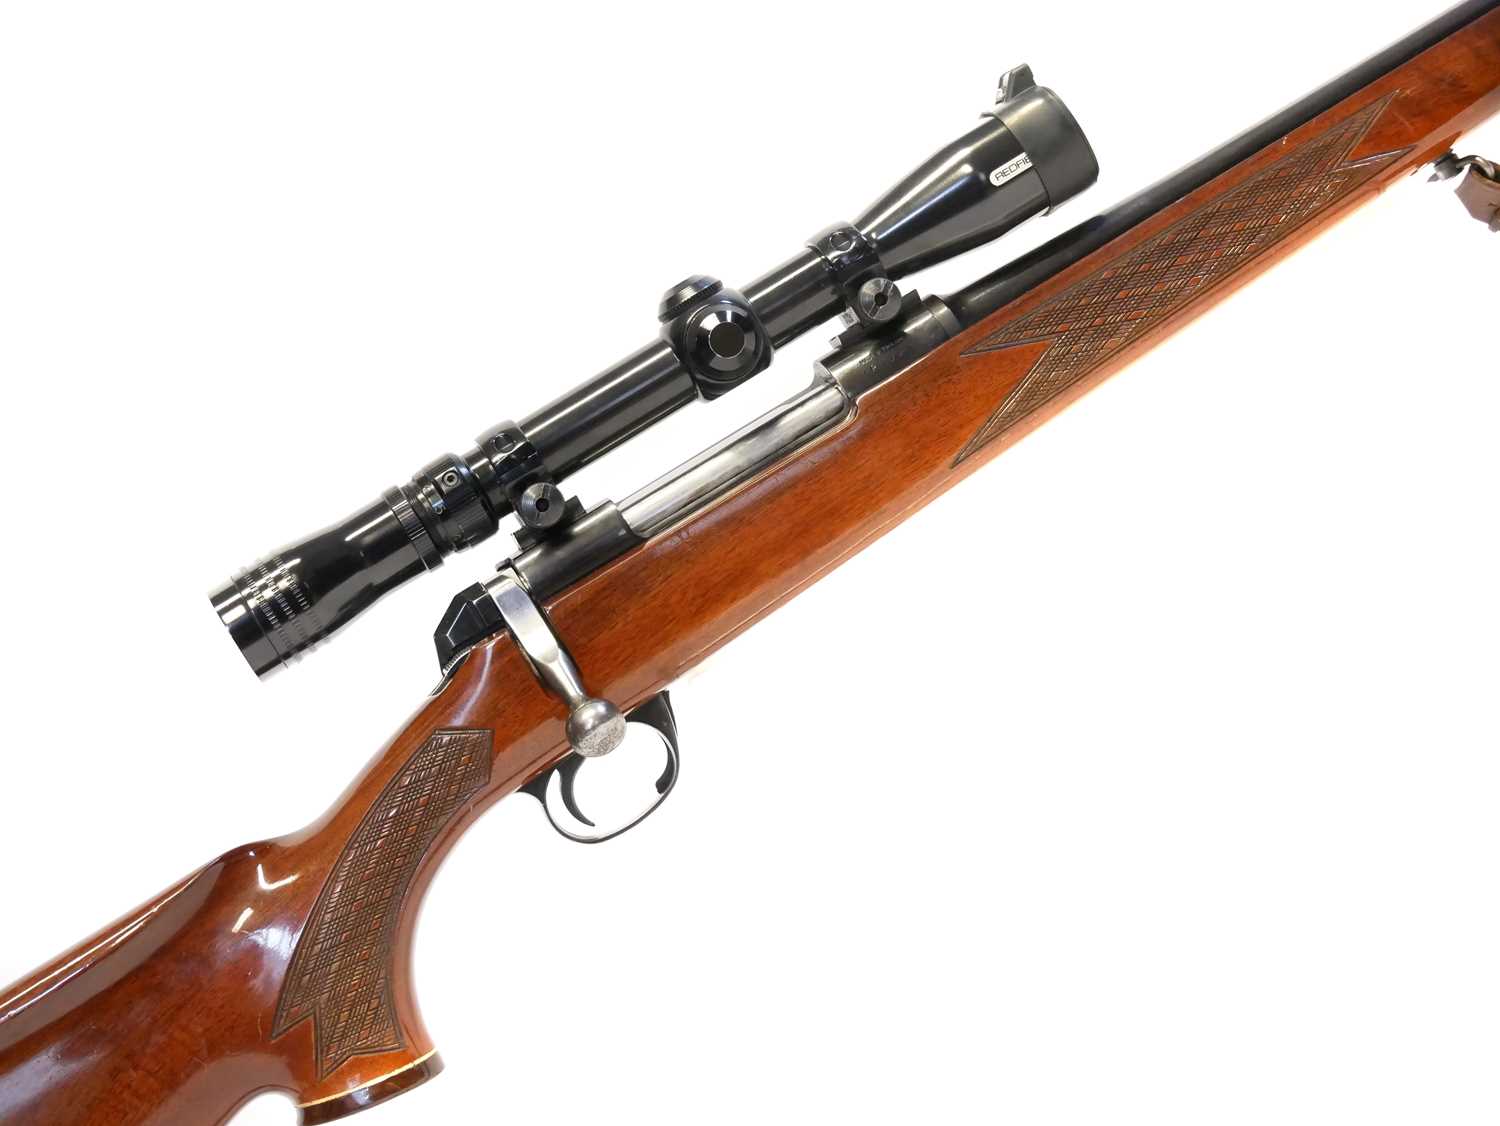 BSA .222 bolt action rifle, serial number 2P3784, 22 inch barrel, chequered stock with rosewood